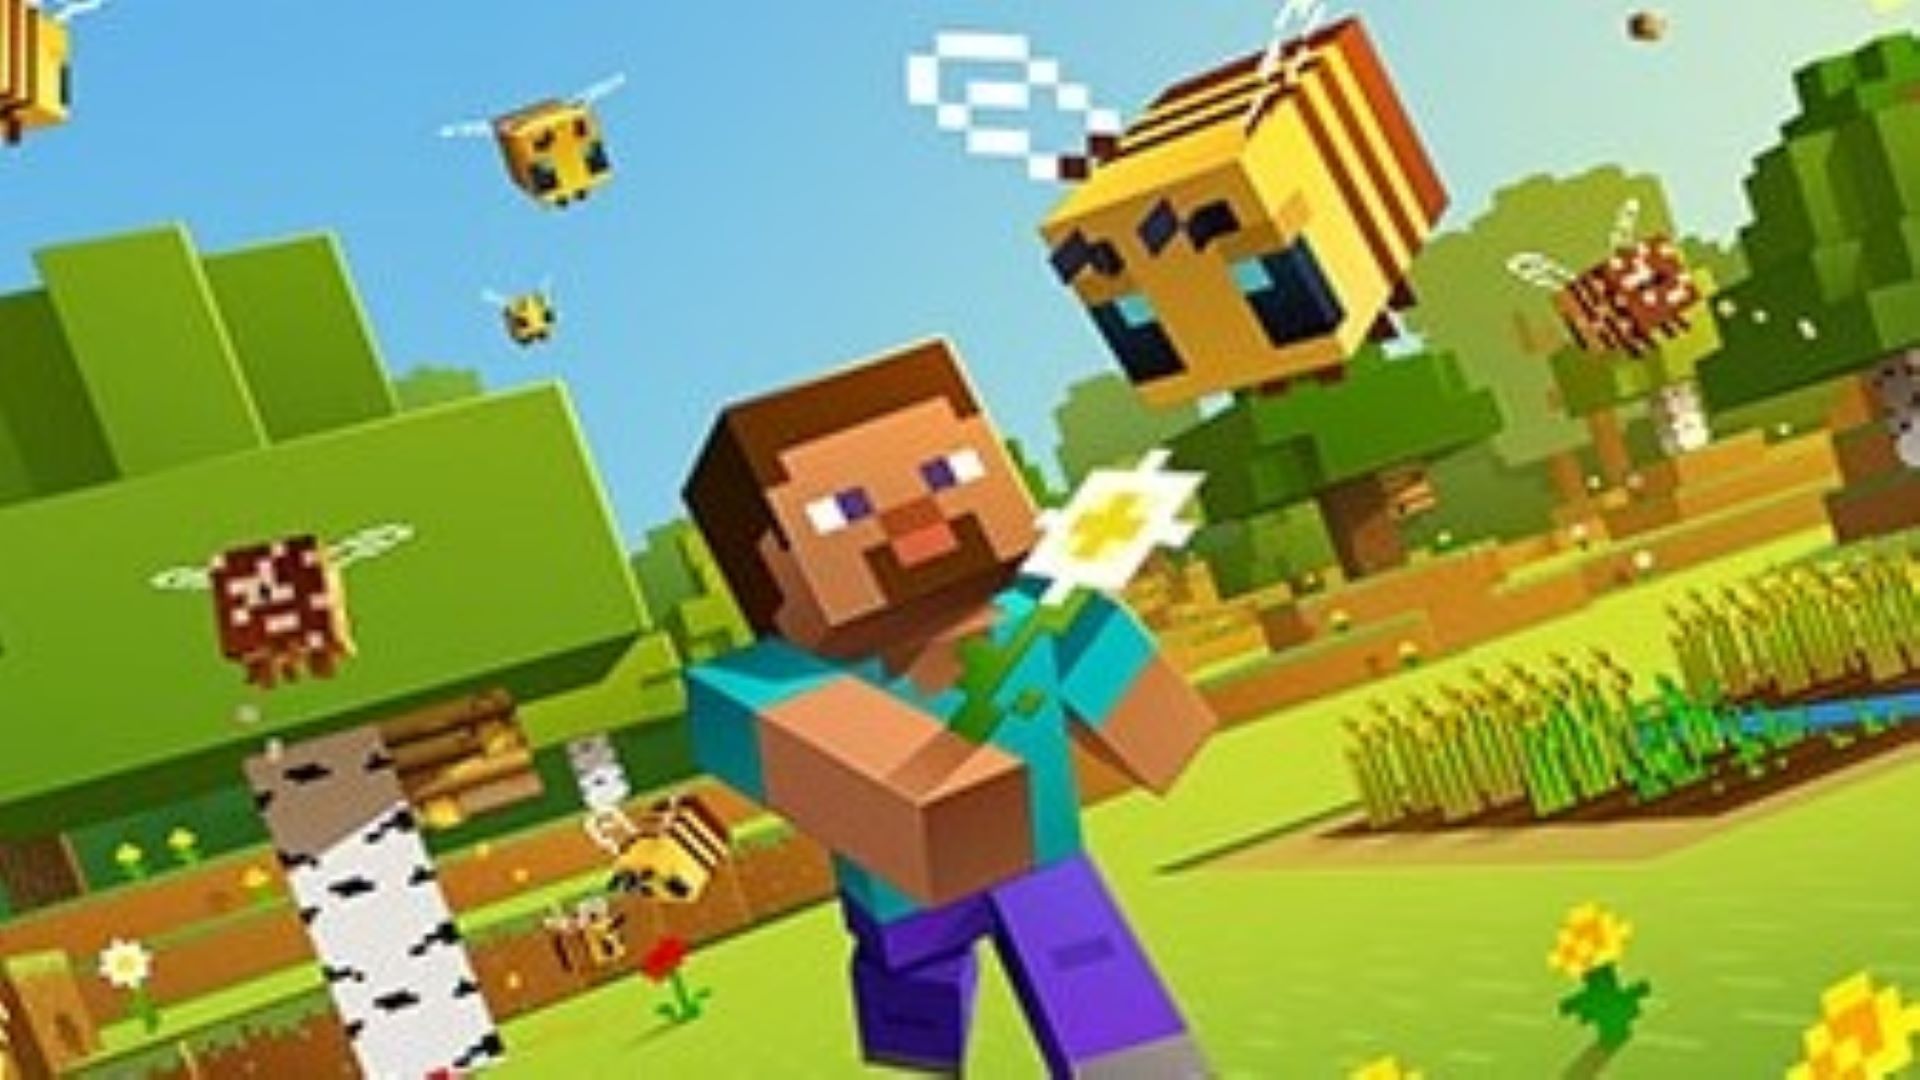 Minecraft map helps increase 1 / 4 of one million for charity